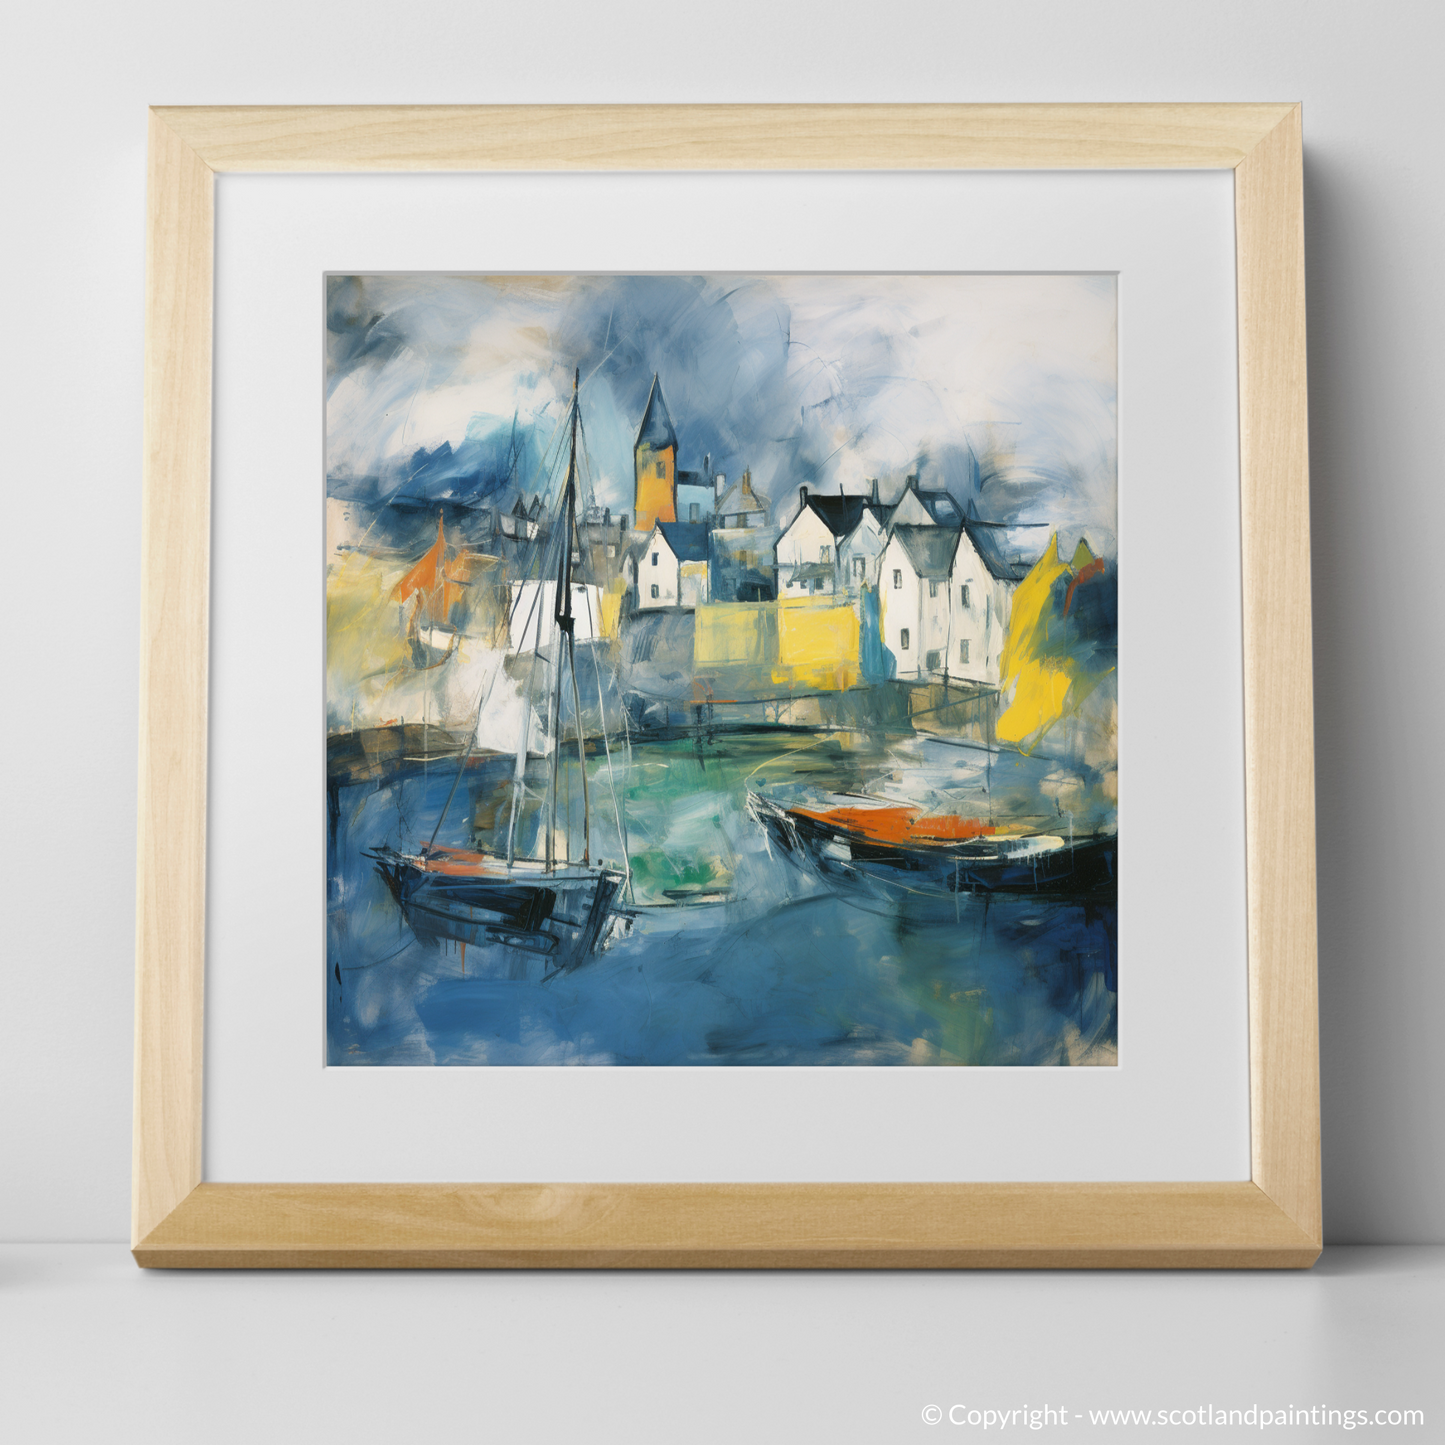 Stormy Skies Over Tobermory Harbour: An Abstract Voyage